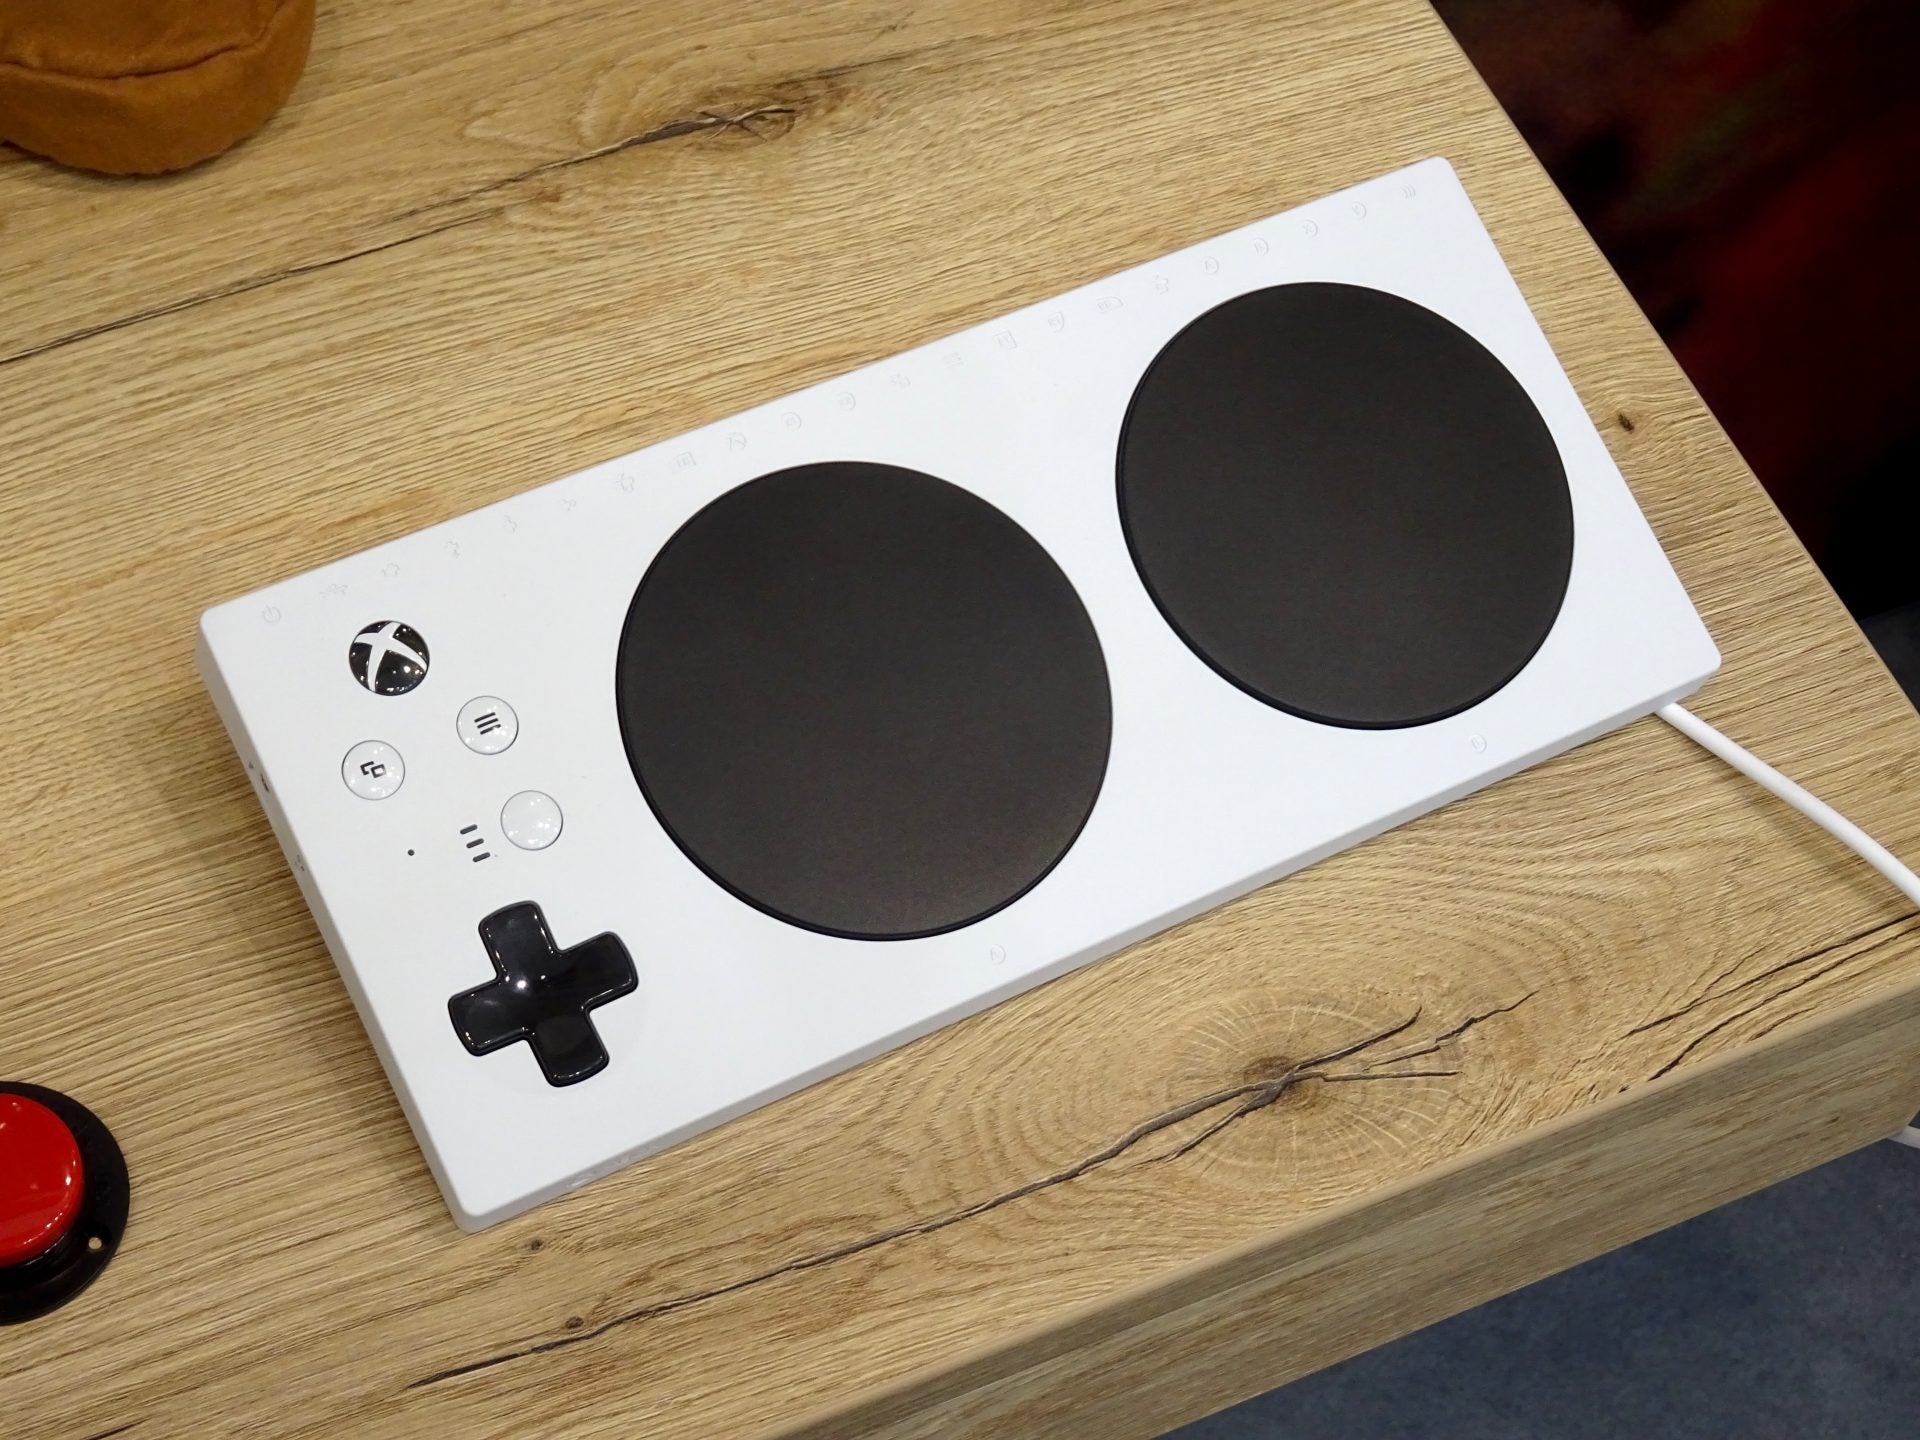 Top down view of the Xbox Adaptive Controller.